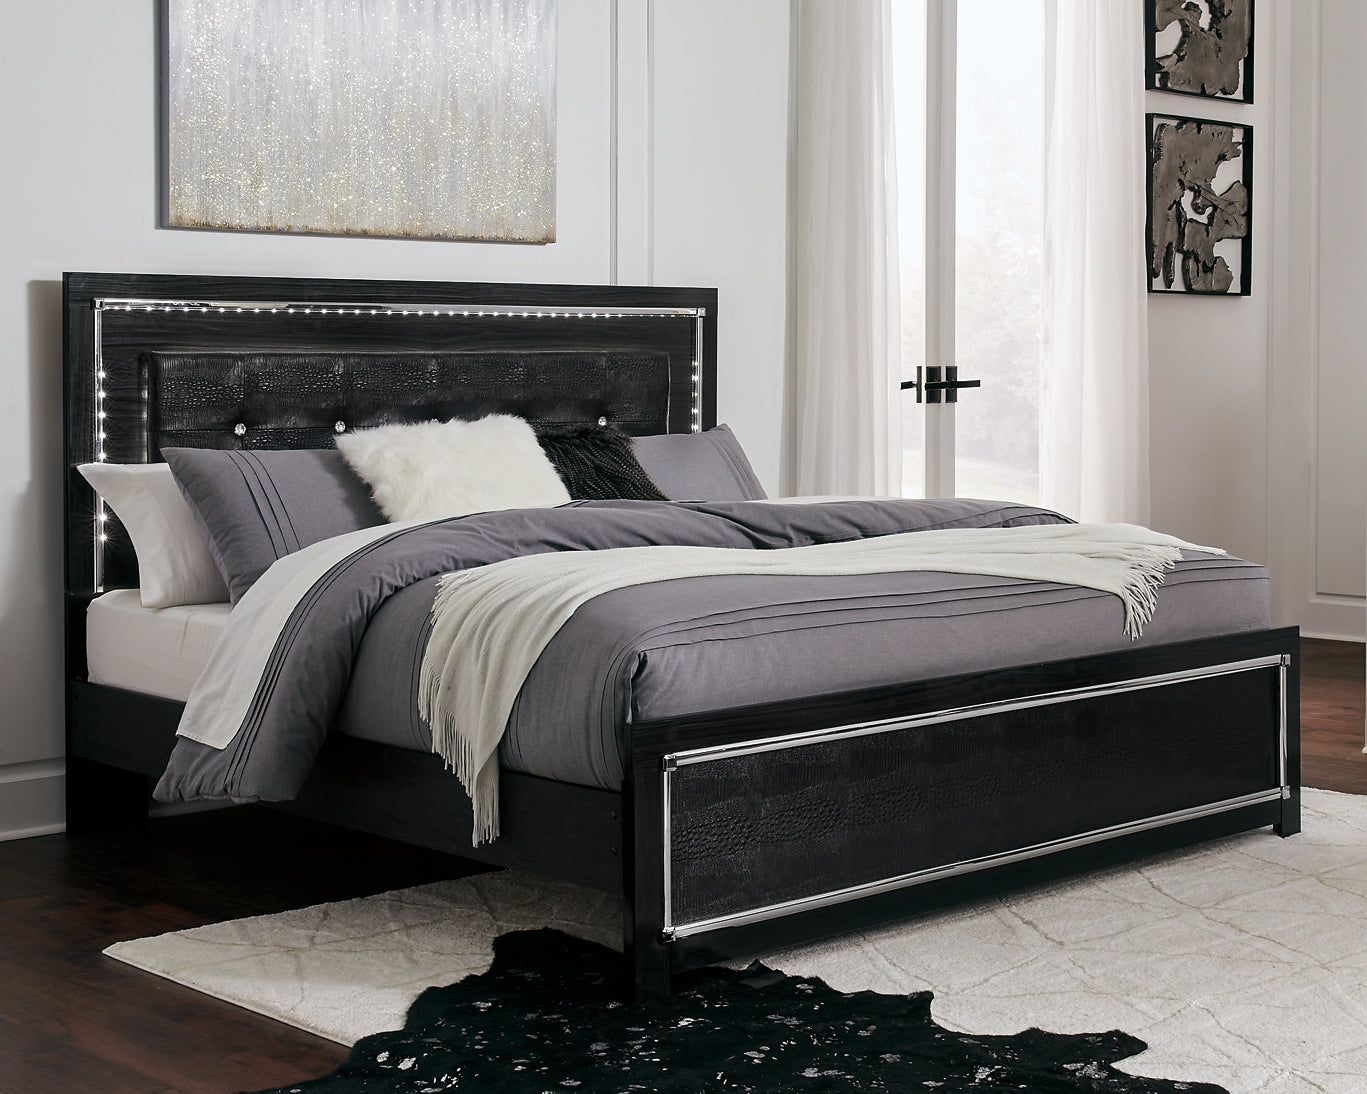 Kaydell Queen Upholstered Panel Bed at Cloud 9 Mattress & Furniture furniture, home furnishing, home decor